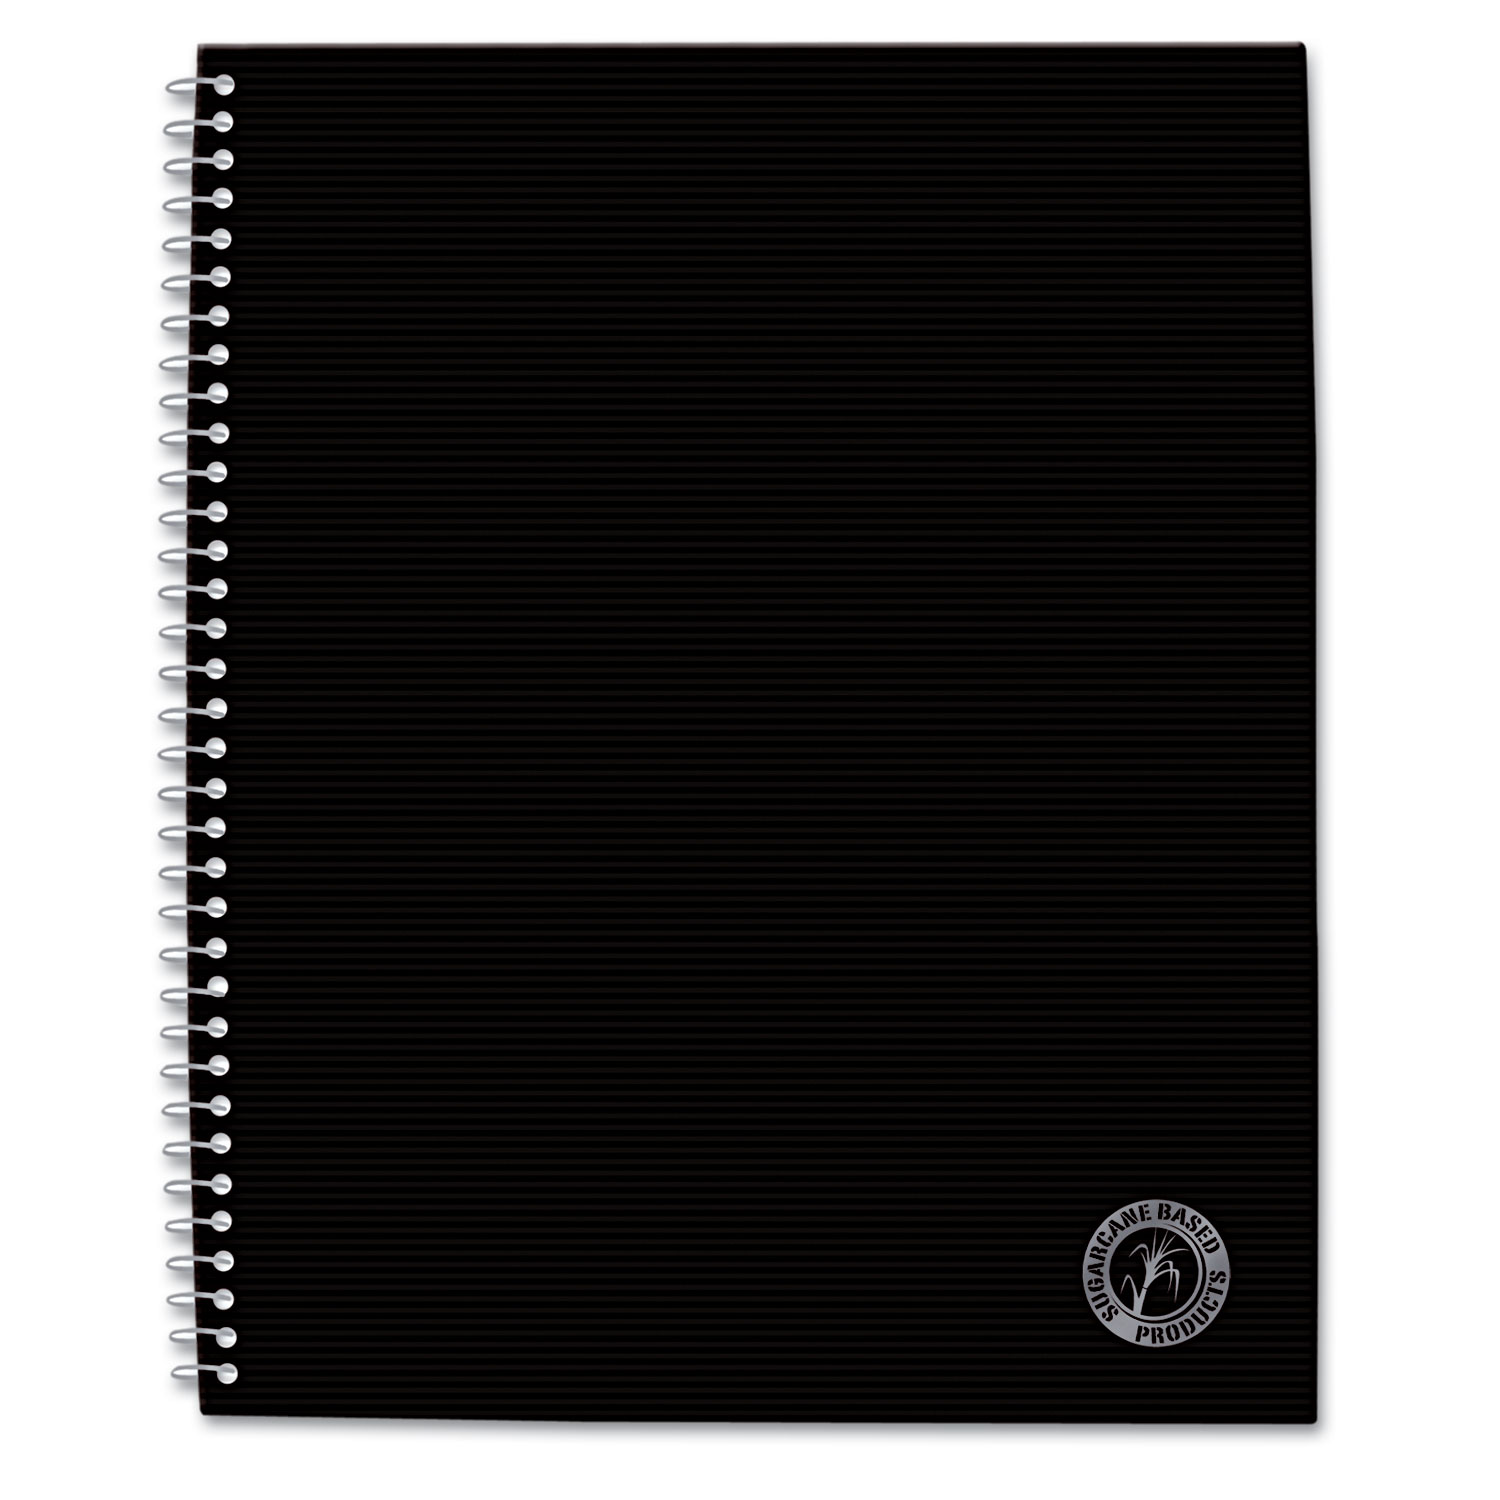 Deluxe Sugarcane Based Notebooks, 1 Subject, Medium/College Rule, Black Cover, 11 x 8.5, 100 Pages